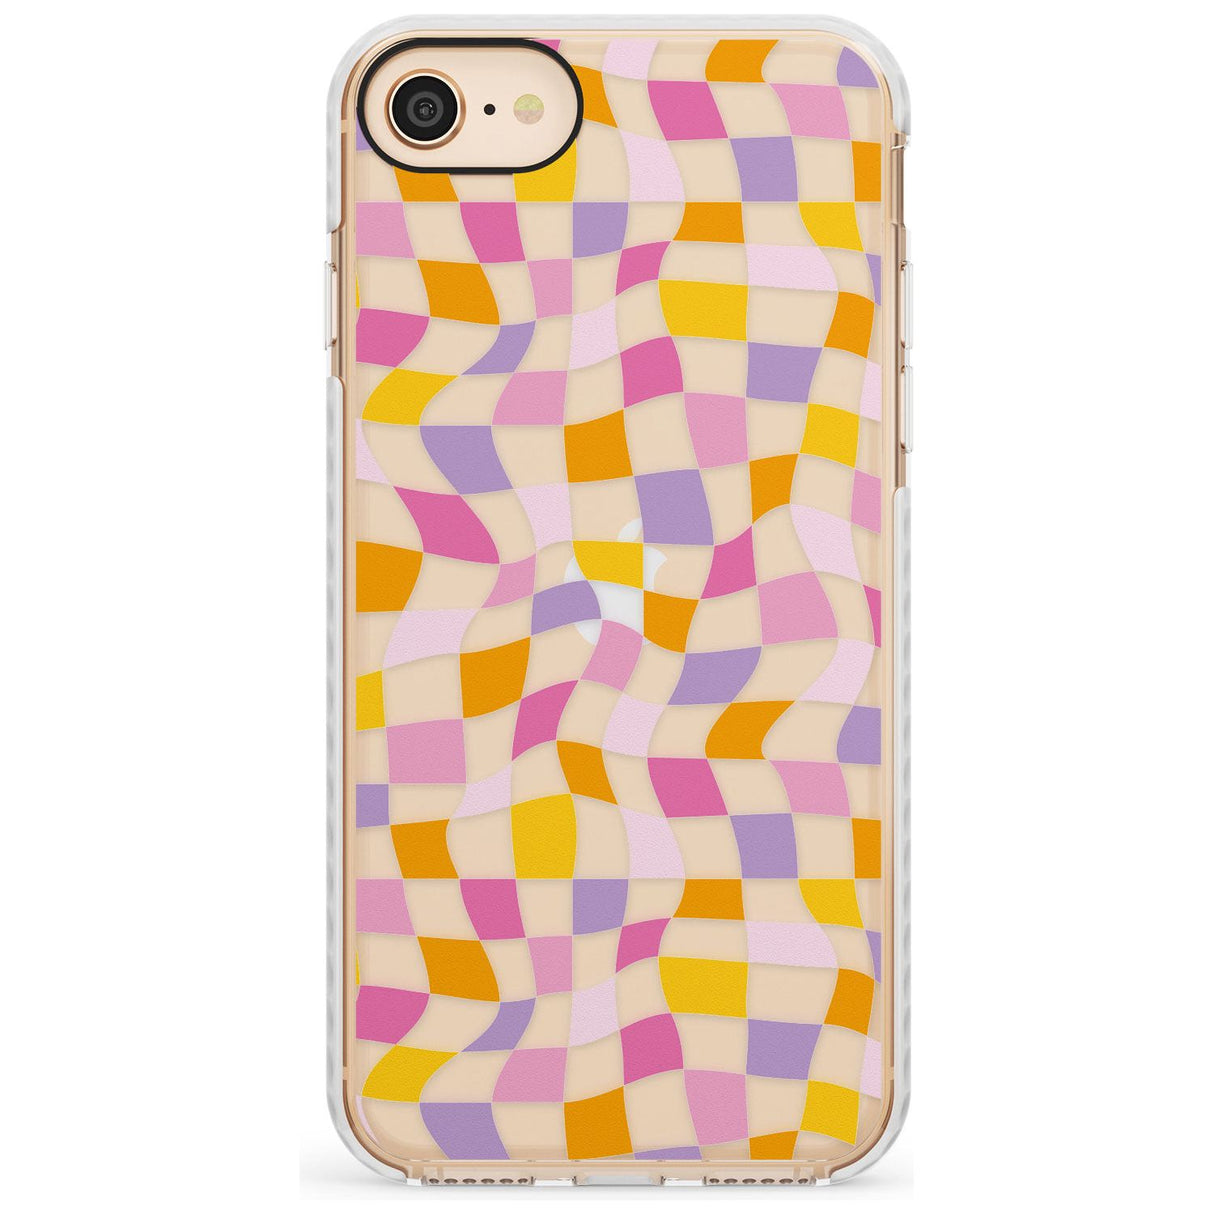 Wonky Squares Pattern Impact Phone Case for iPhone SE 8 7 Plus